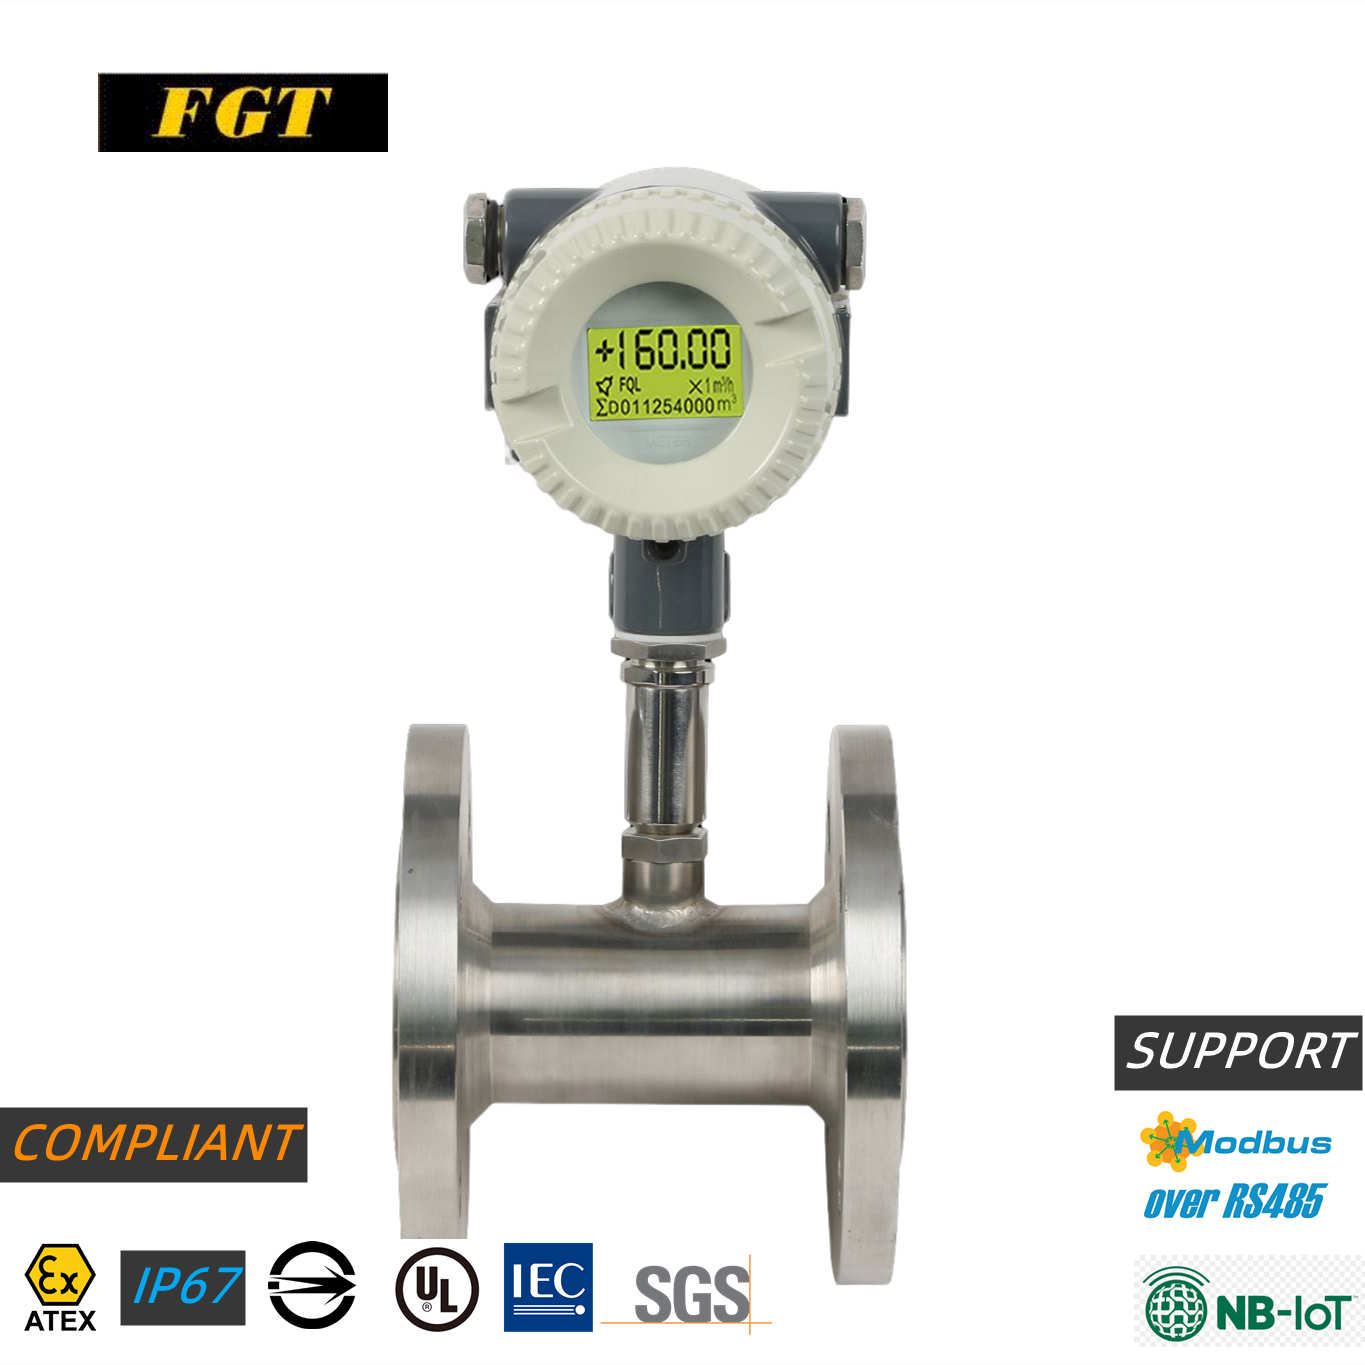 Turbine Flow Meter Explained | Operation and Calibration First General Technology Inc. | first general technology inc.